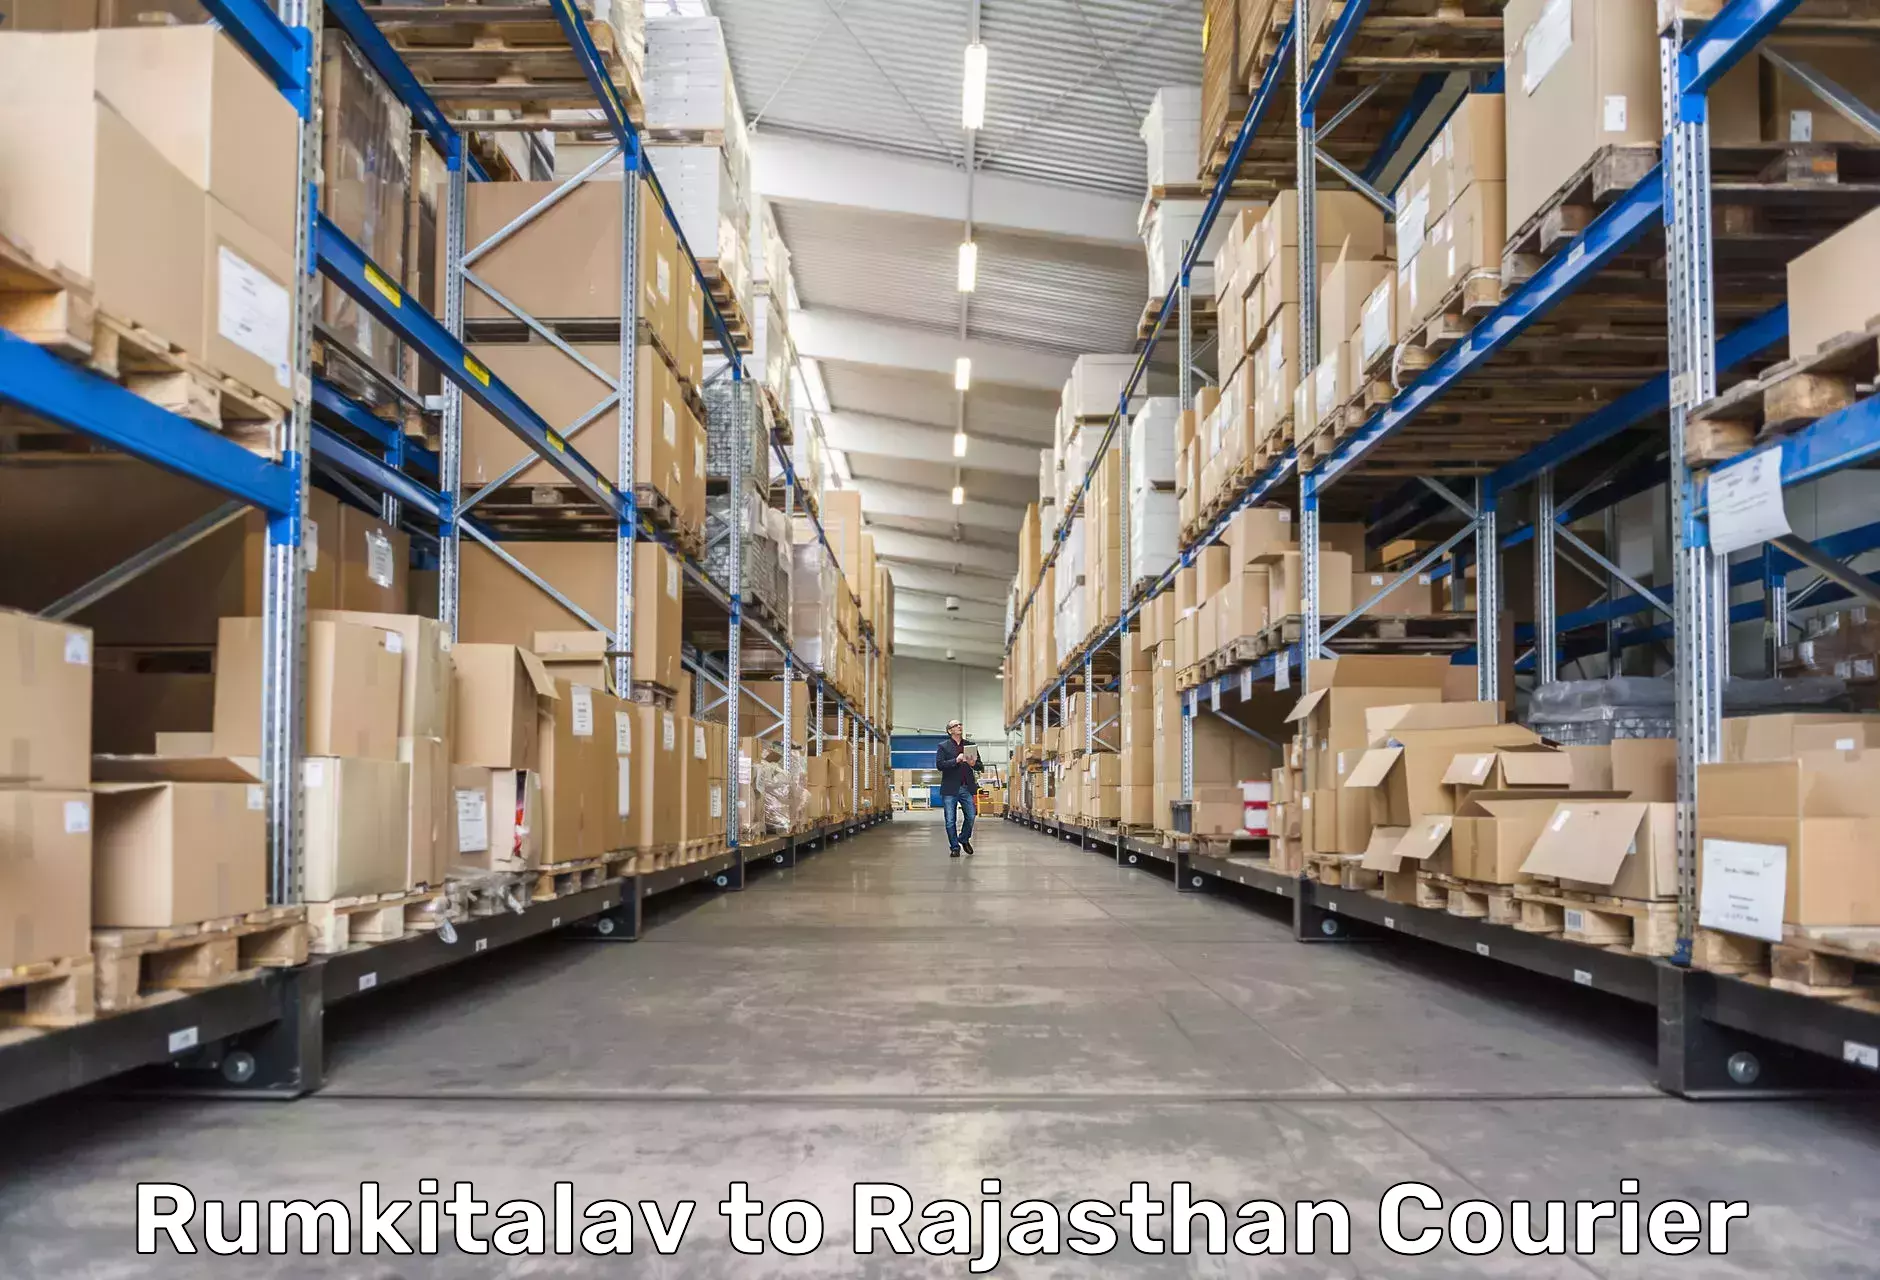 Courier service comparison Rumkitalav to Rajasthan